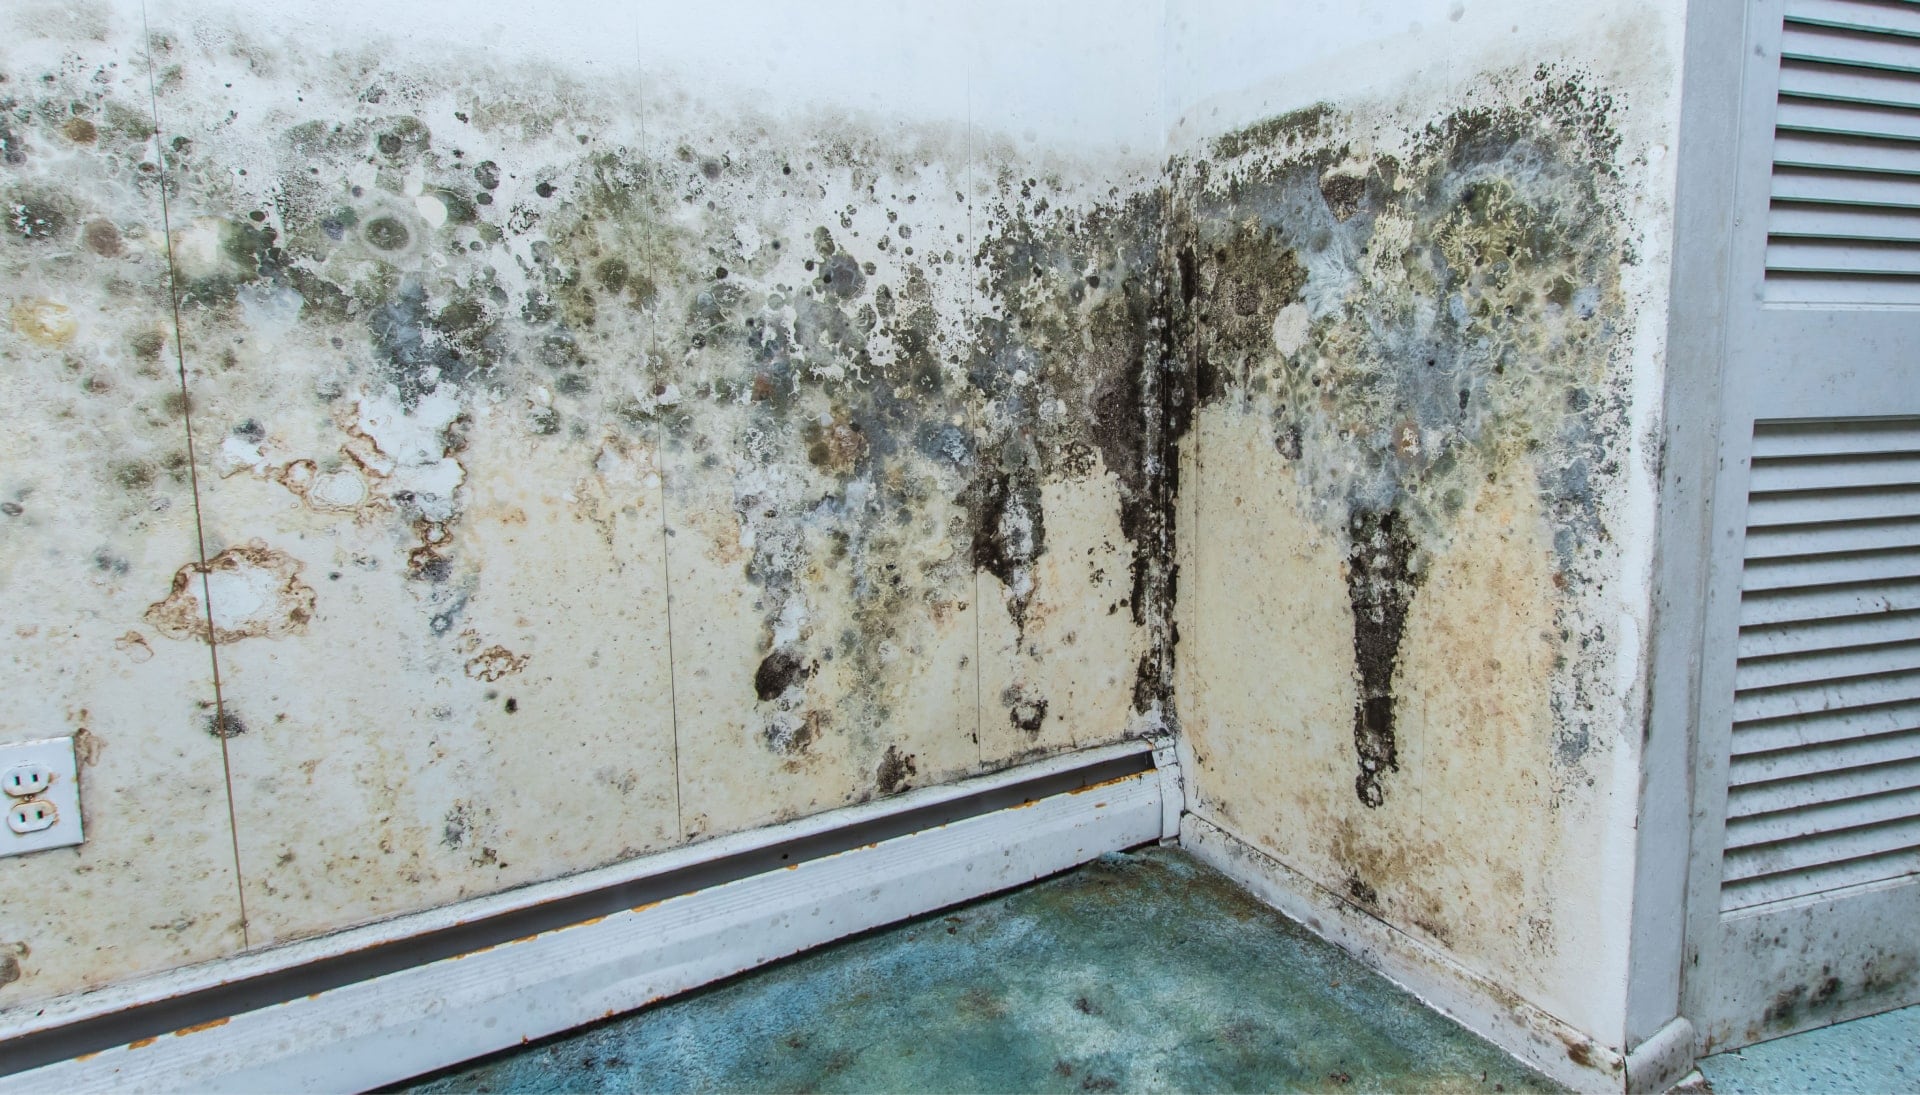 Professional mold removal, odor control, and water damage restoration service in Albany, New York.